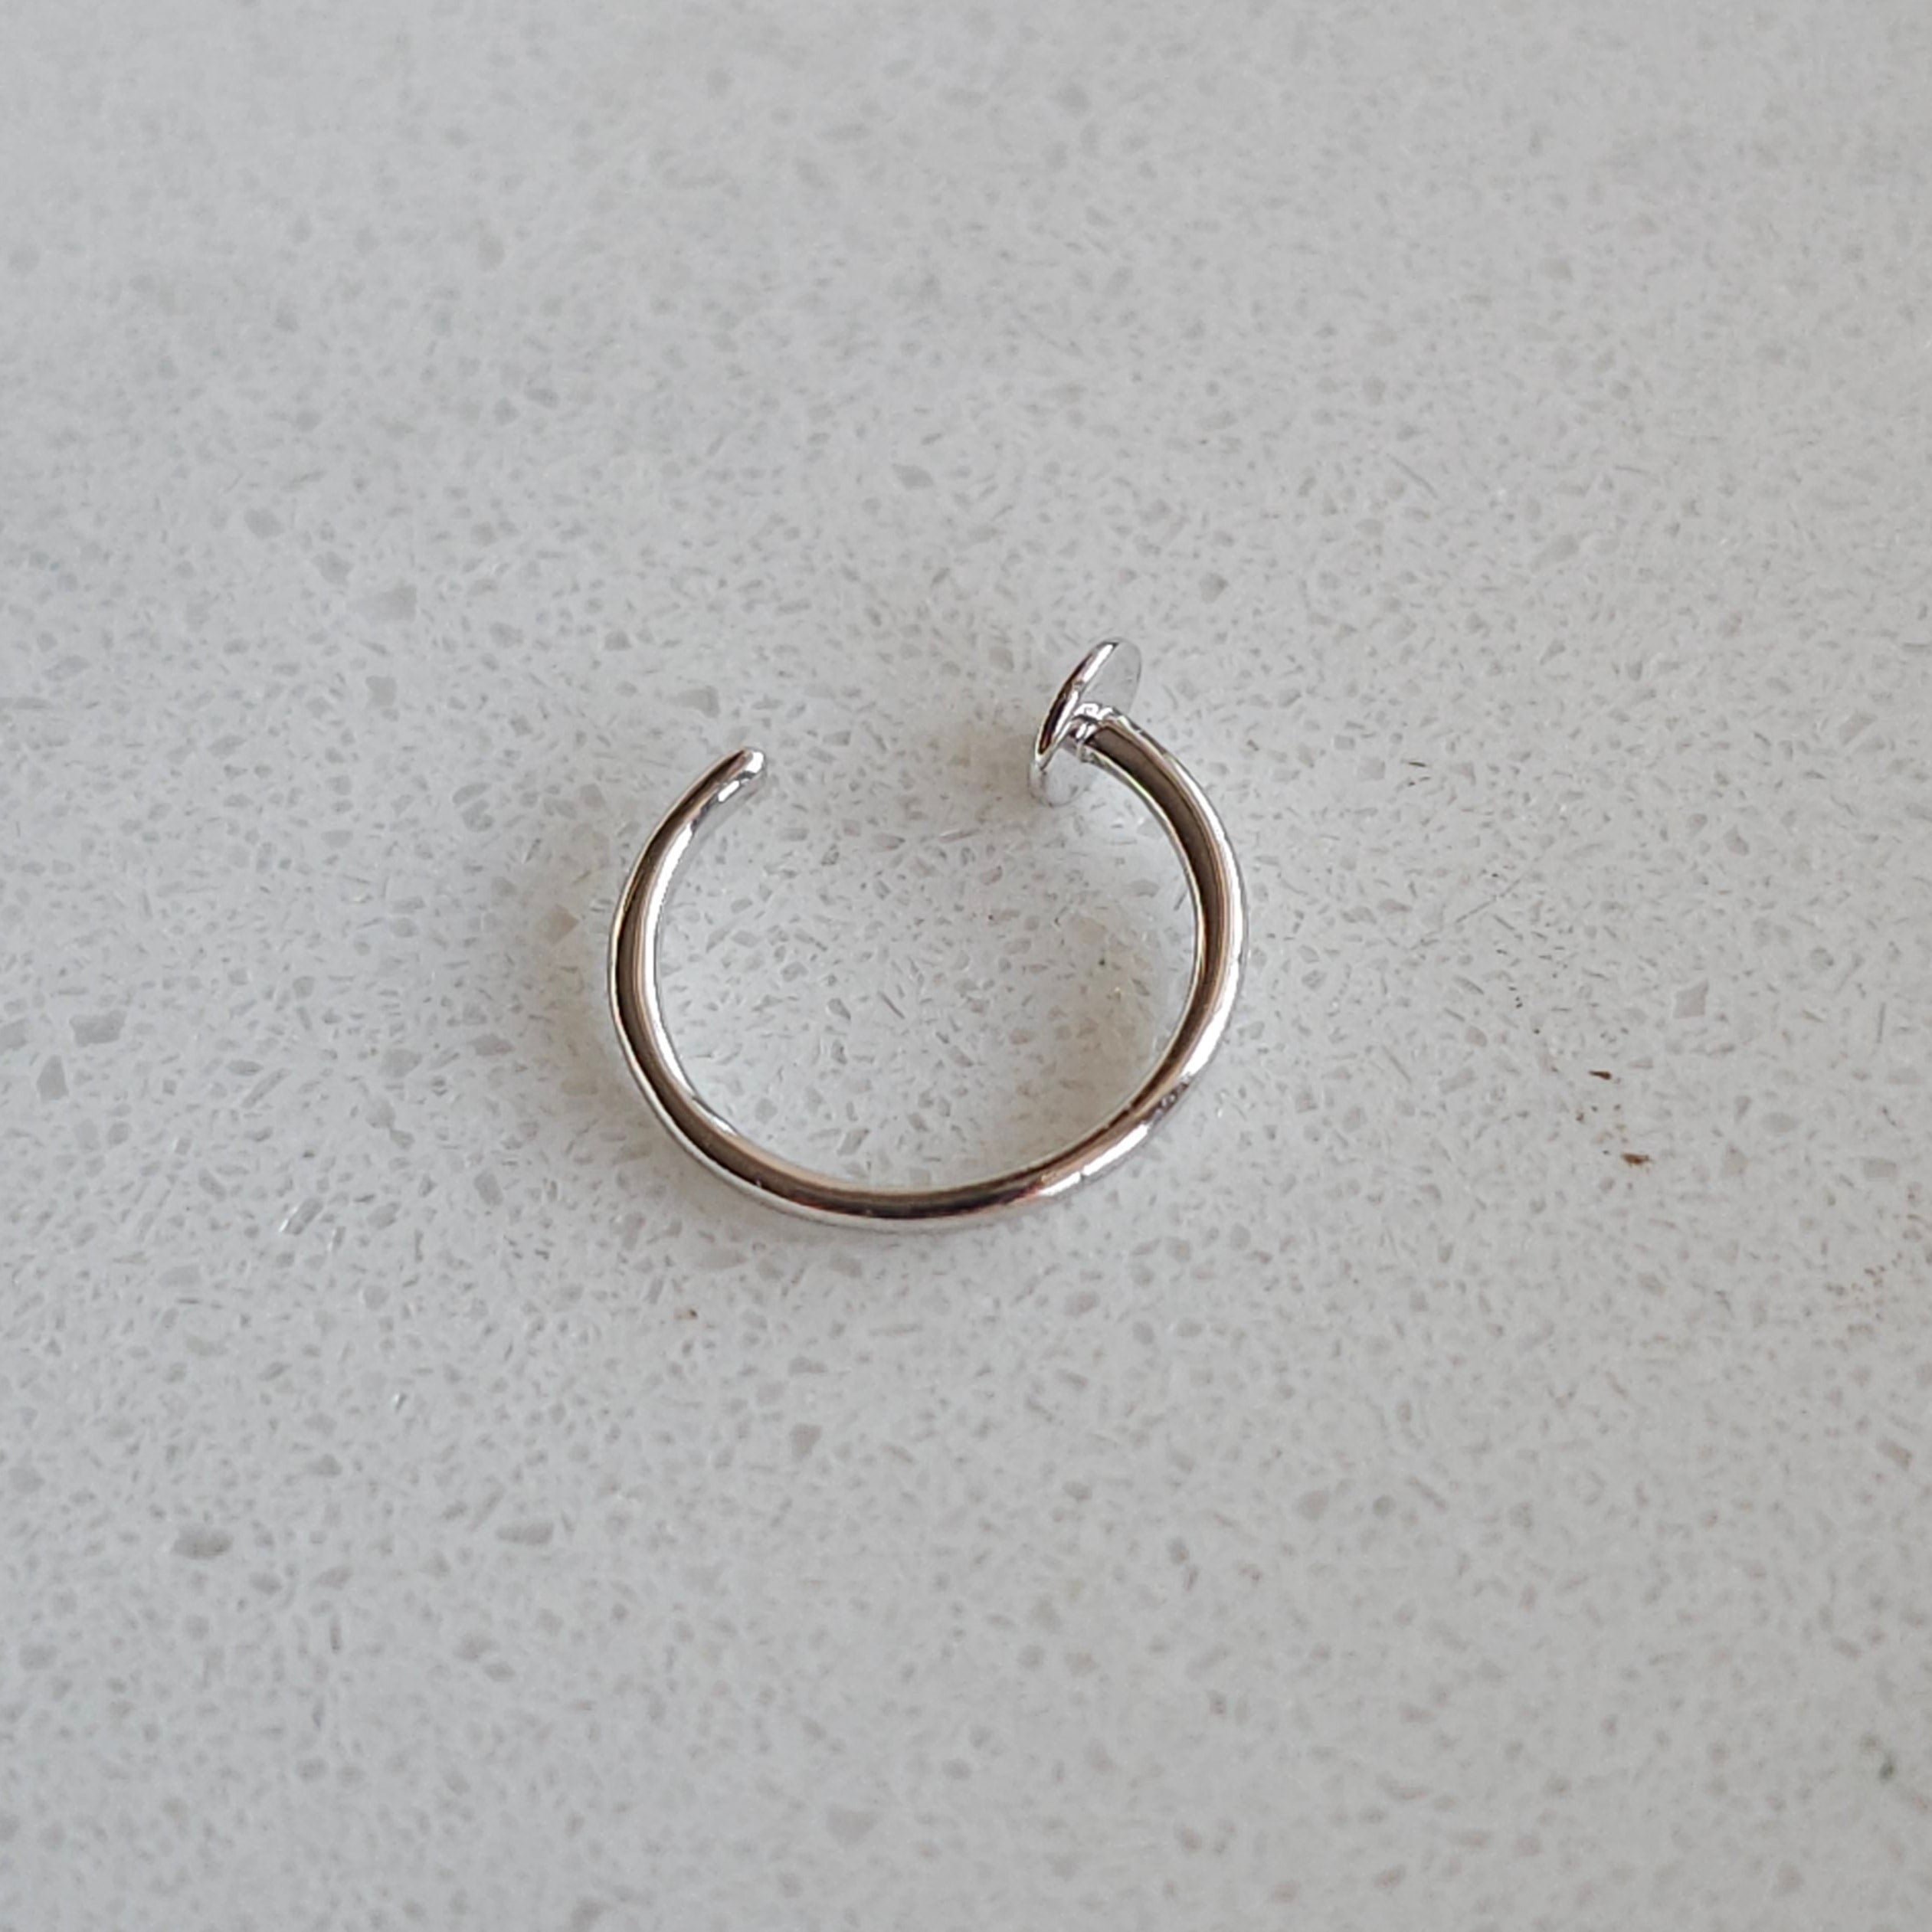 Unique Nose Ring, 14K Solid Yellow Gold Indian Nose India | Ubuy